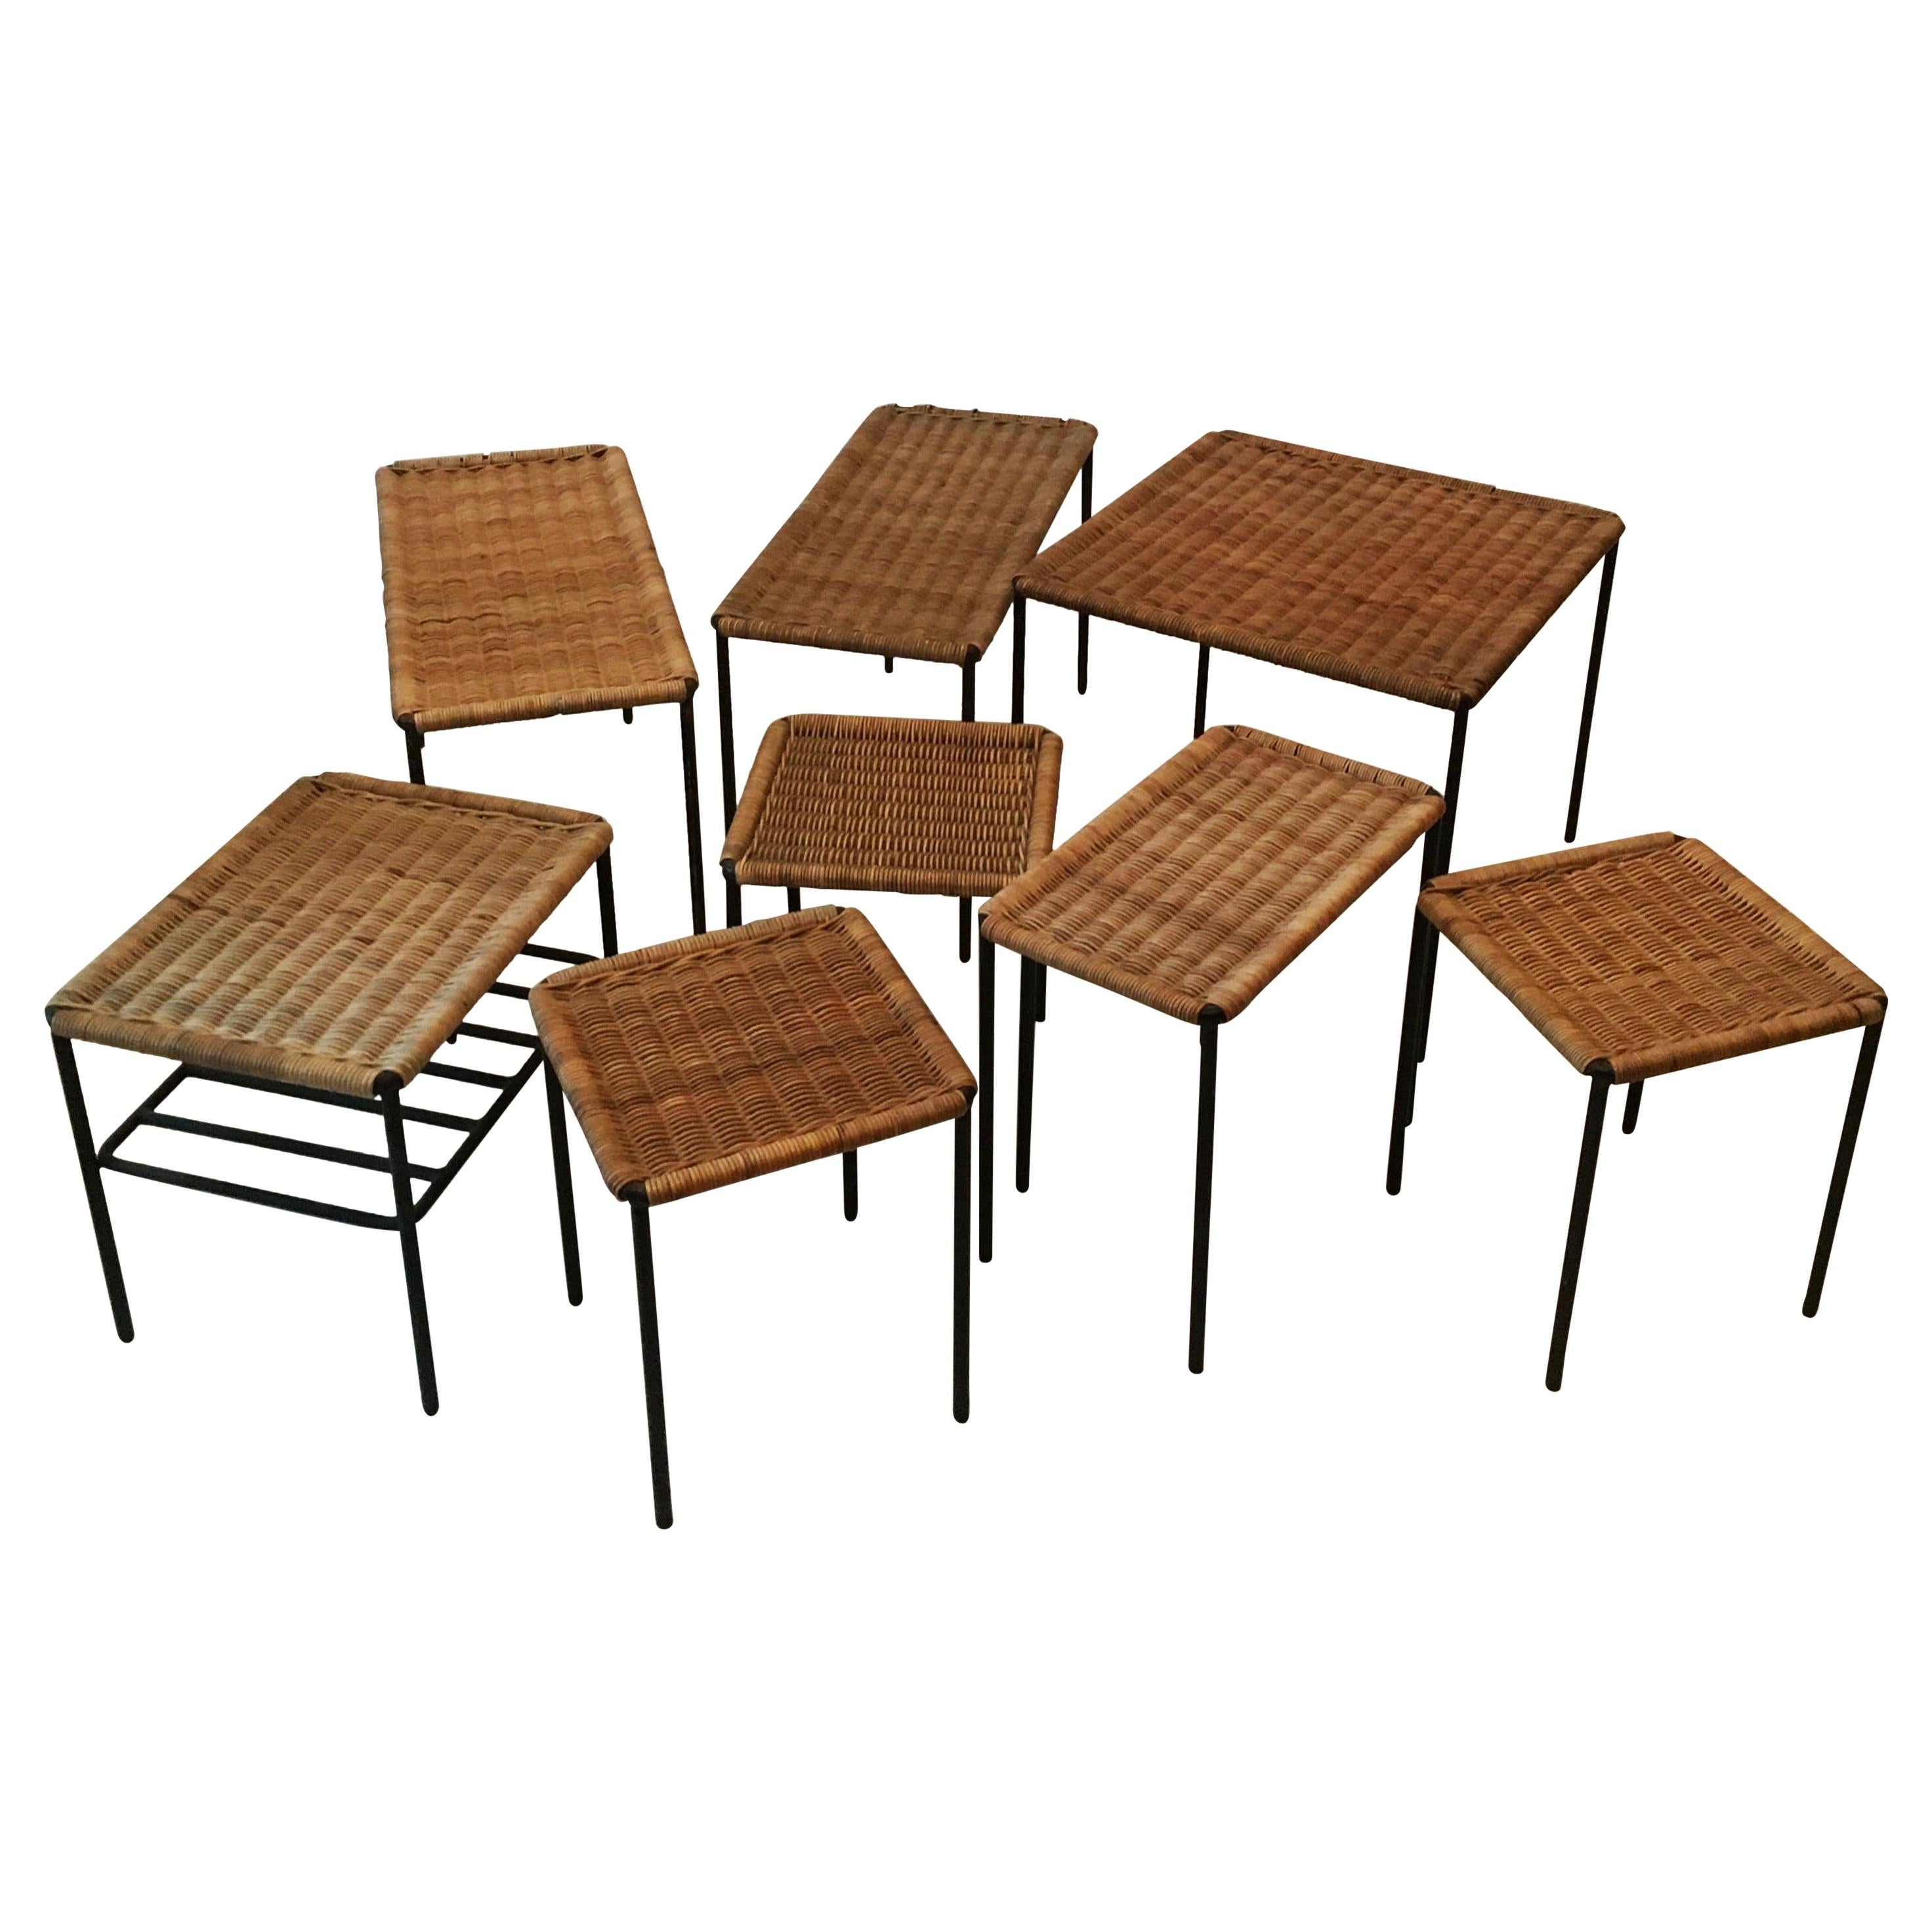 Carl Auböck II Woven Wicker Table Collection, Set of Eight, circa 1950 For Sale